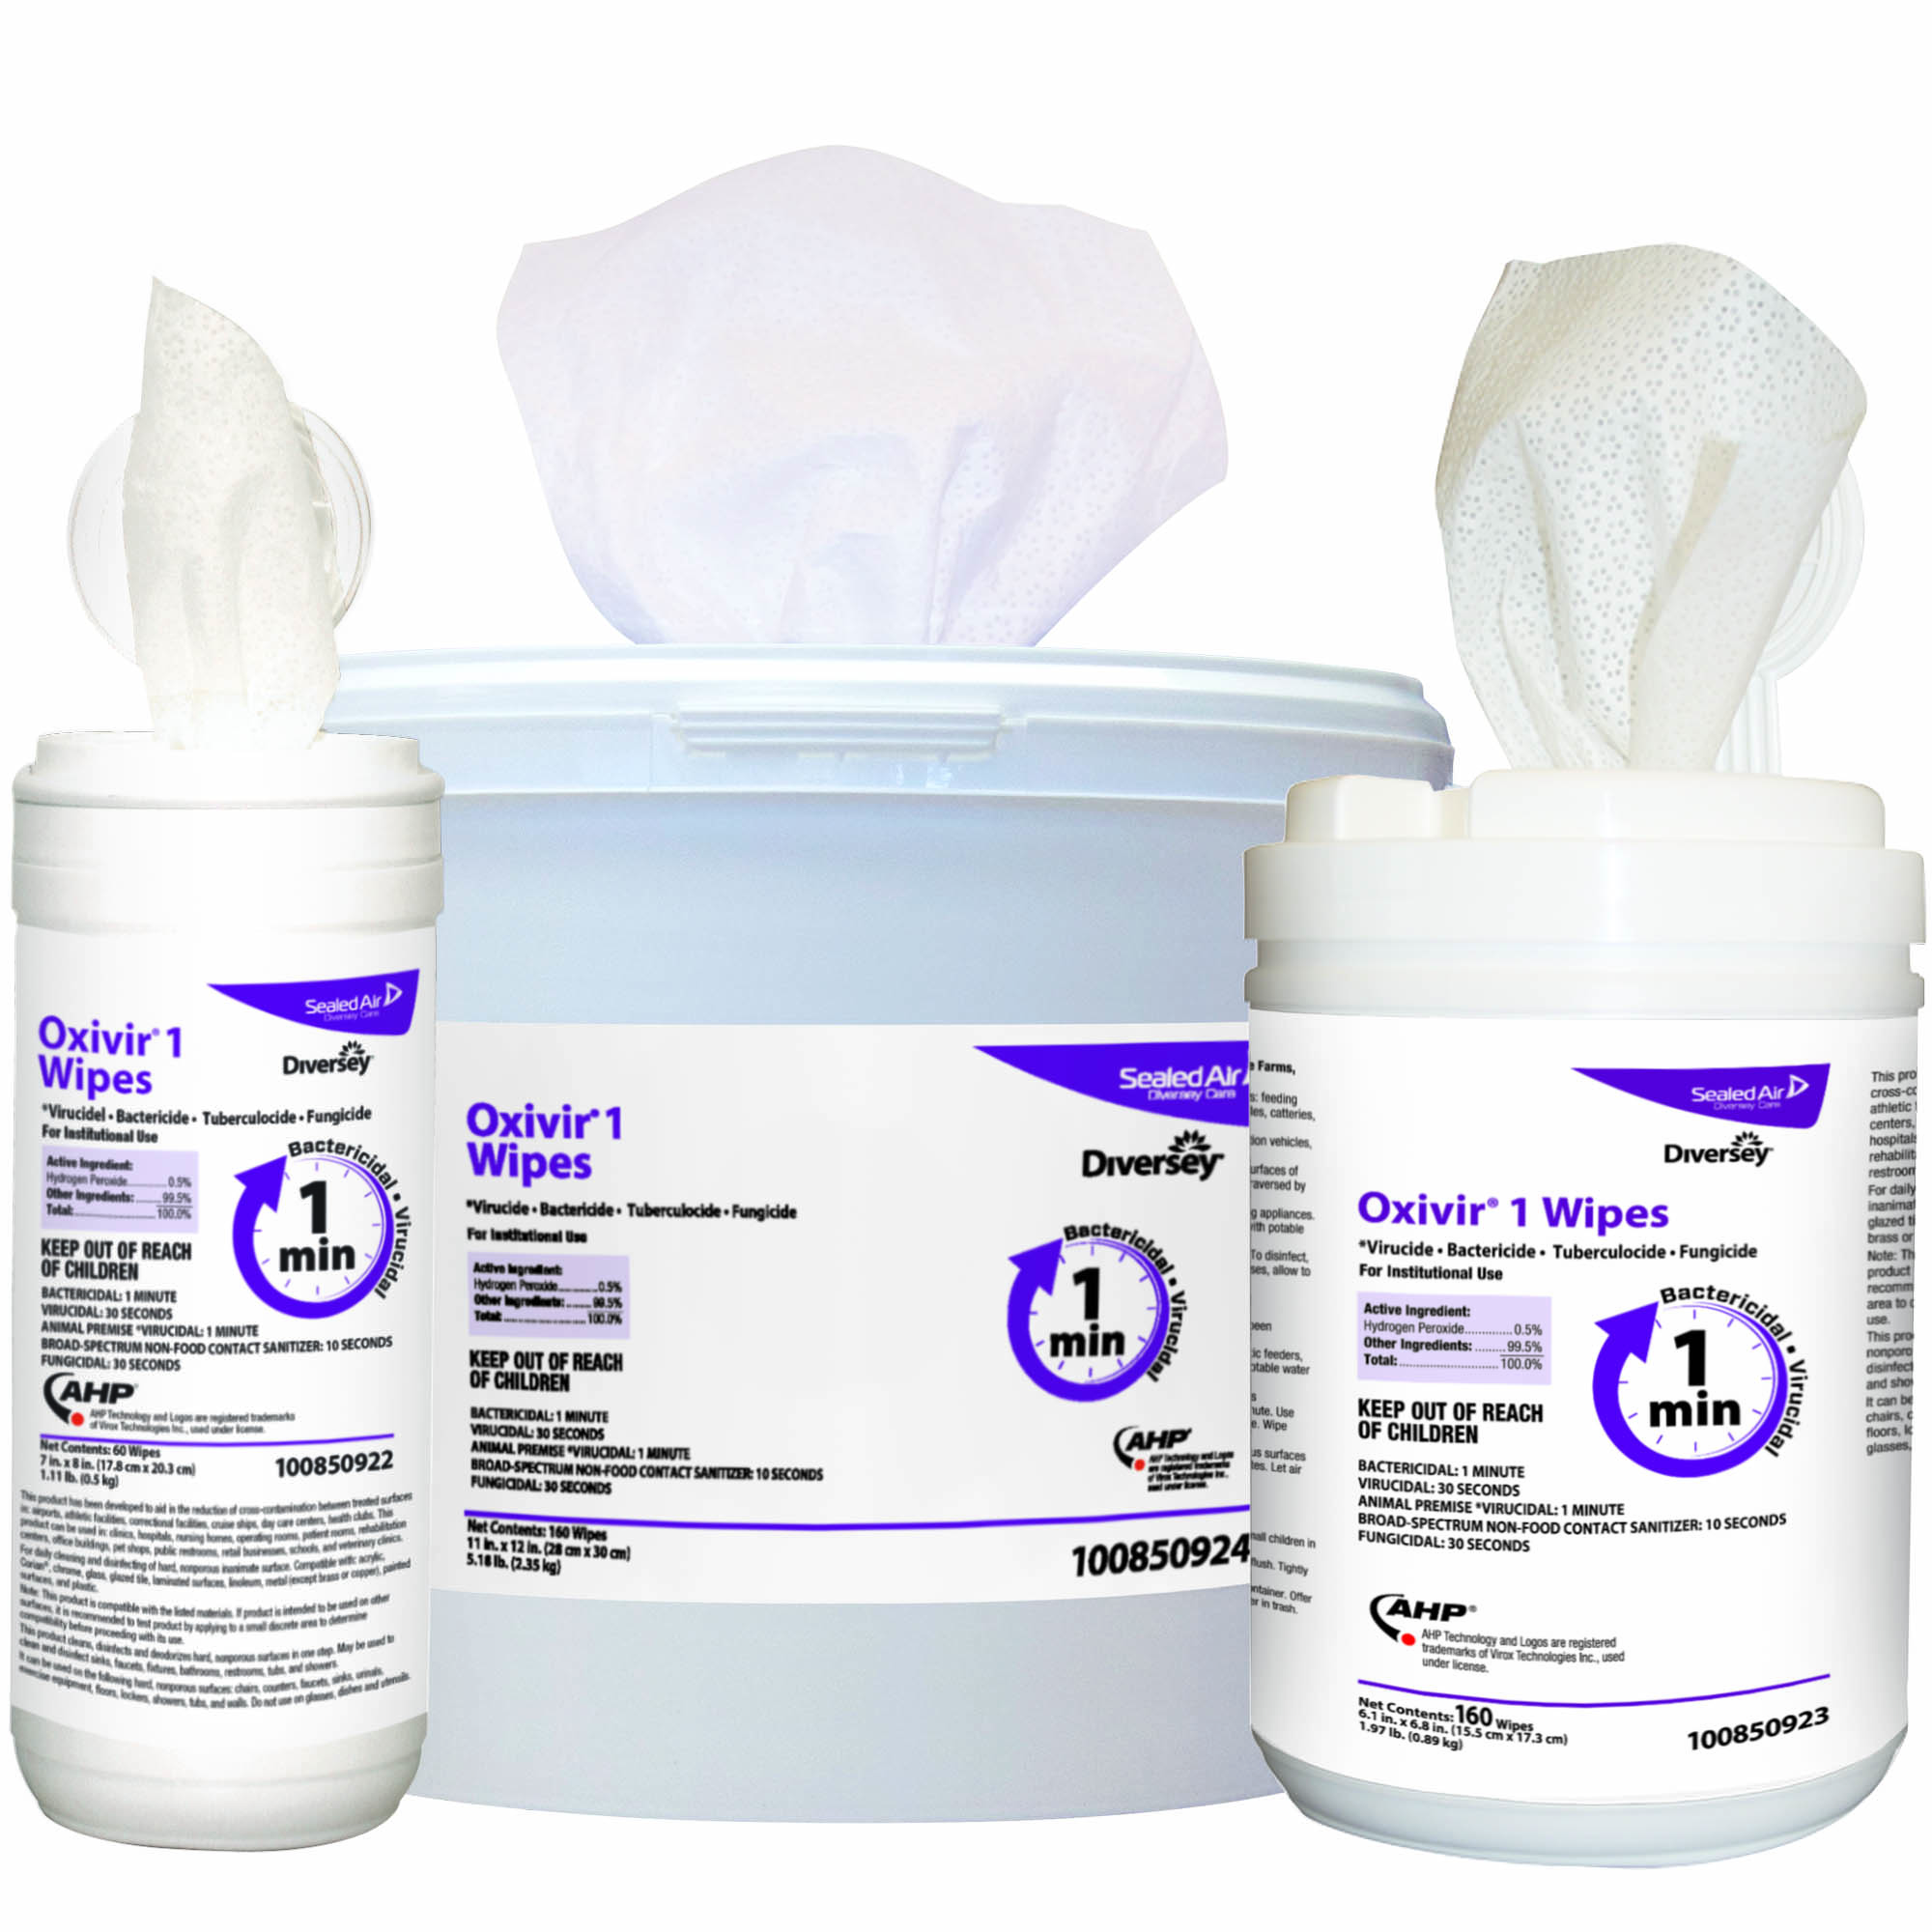 Diversey Care has launched Oxivir1, ready-to-use disinfectant wipes powered by Accelerated Hydrogen Peroxide (AHP)